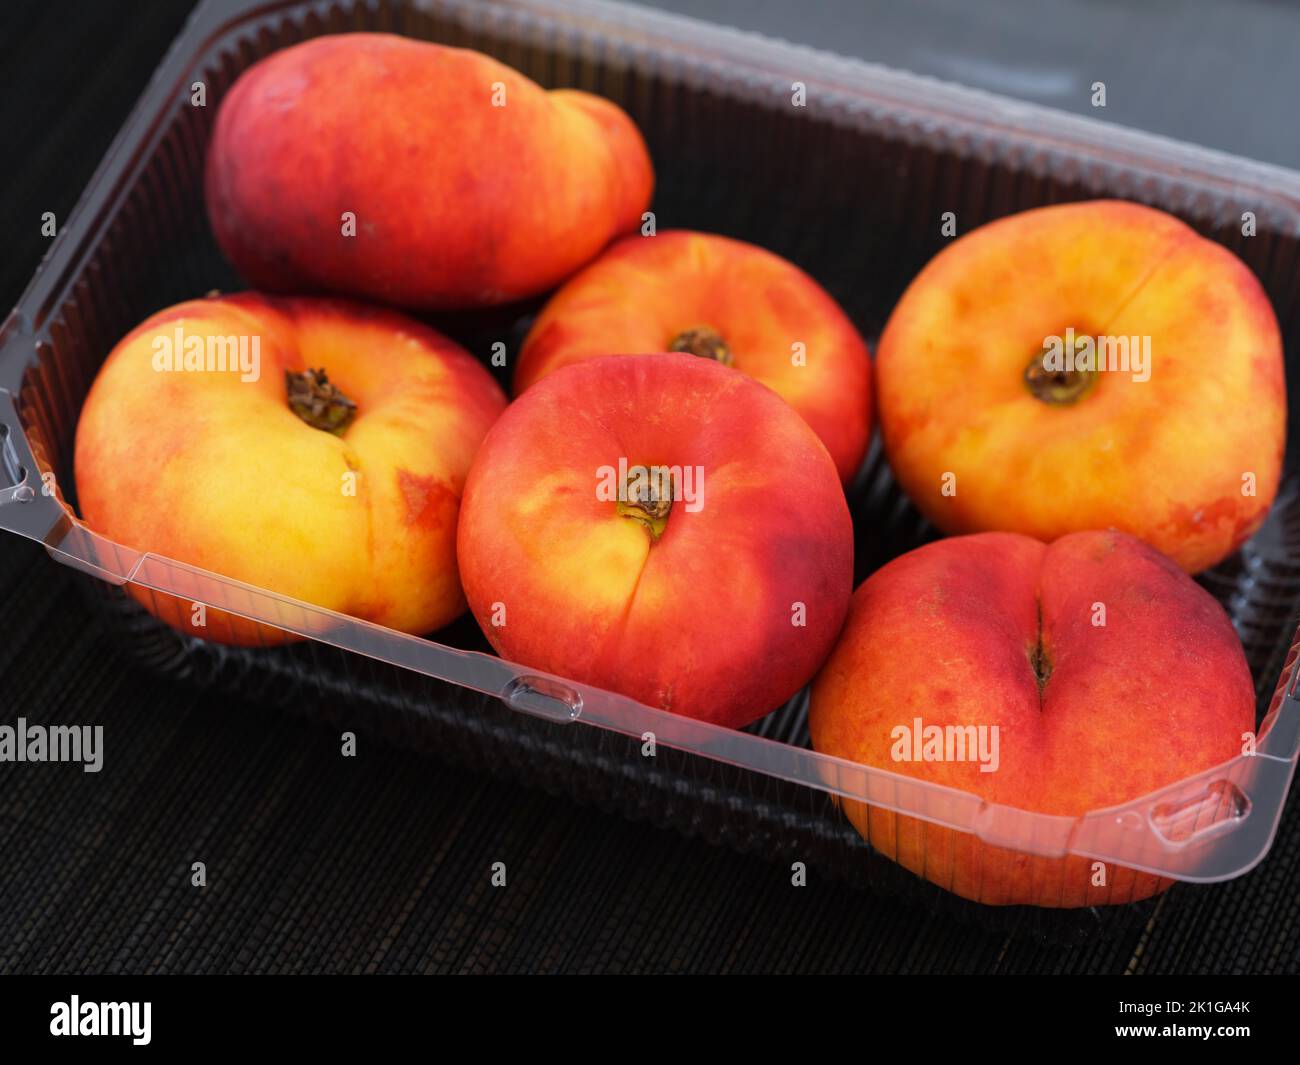 A plastic container with ripe flat peaches in it on black bamboo napkin Stock Photo